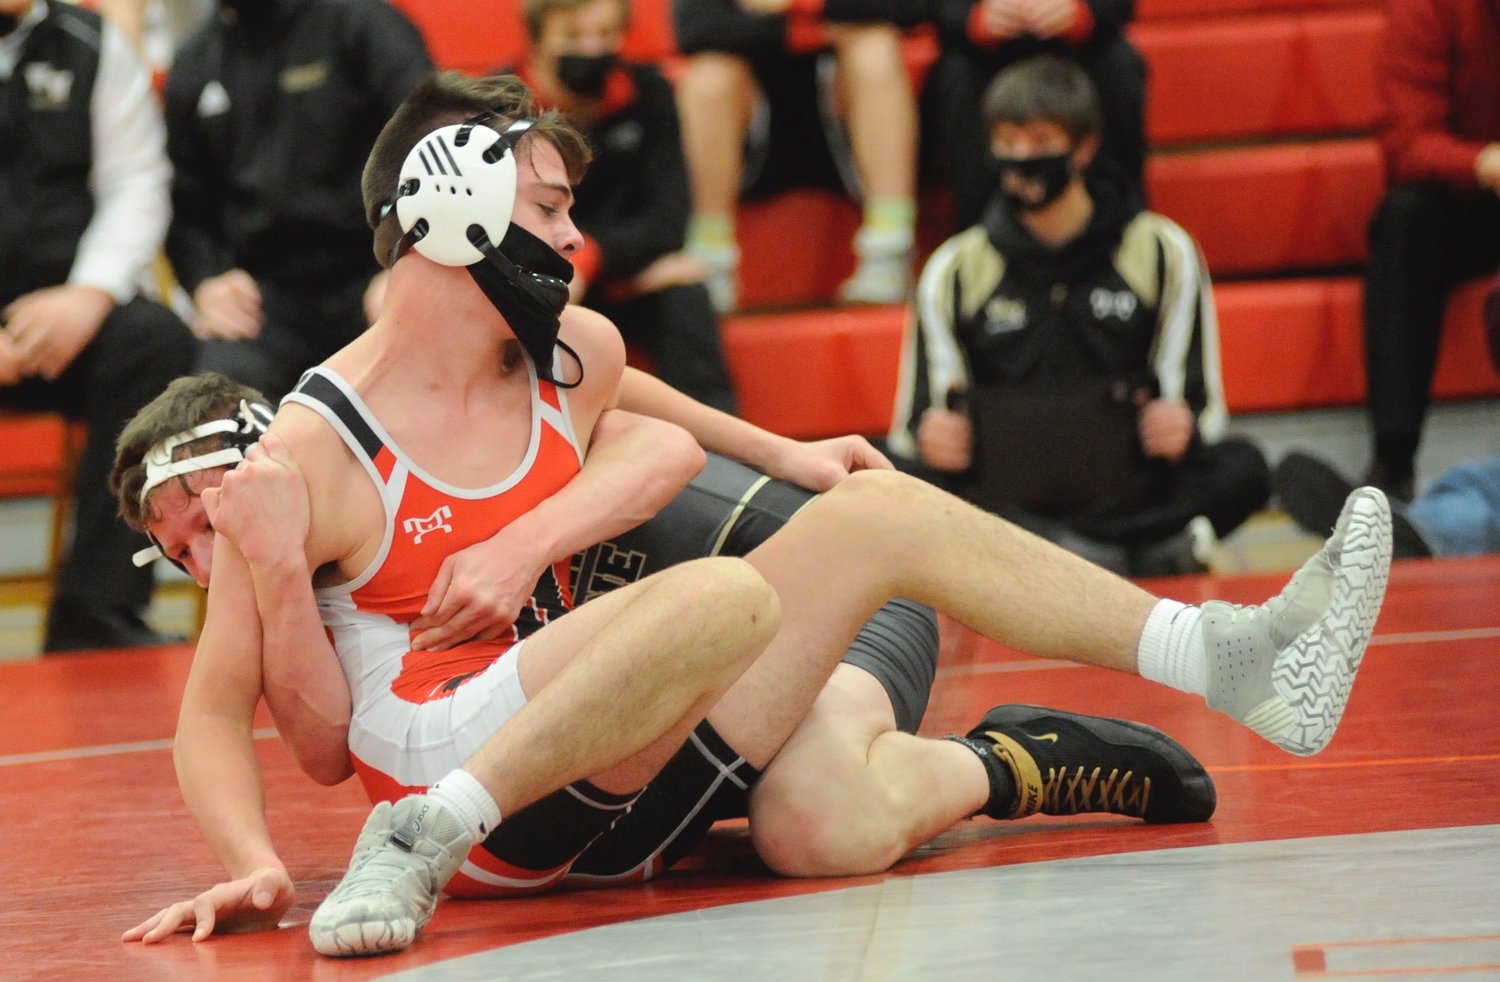 Honesdale’s Paul Renner went onto victory in the 171-pound weight class in bout #13. Renner was a third-place finisher in the district.